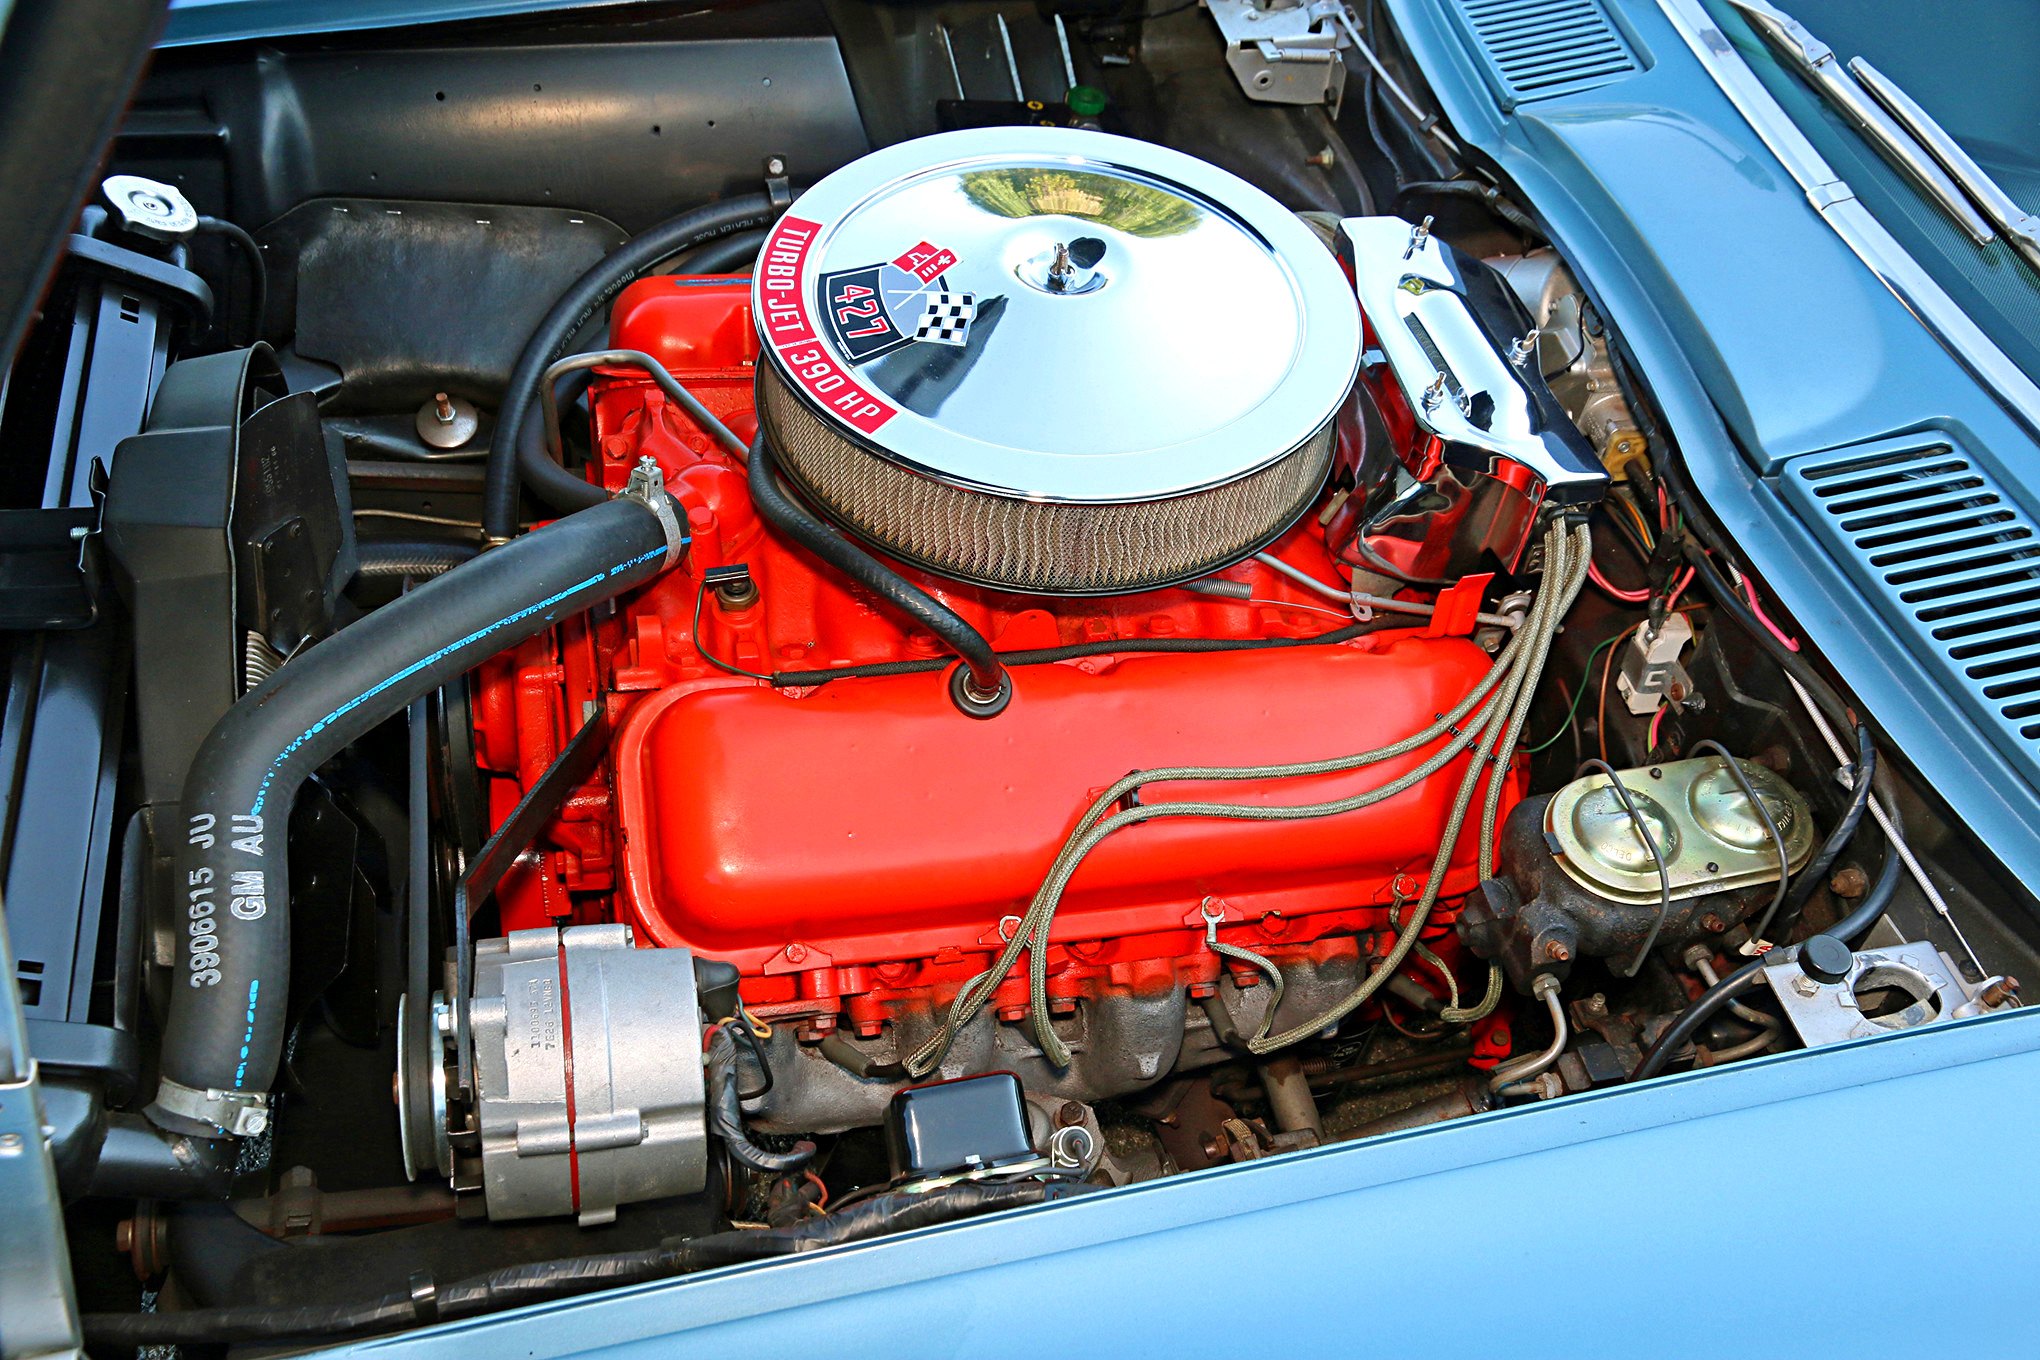 Air Cleaner Turbo-Jet 390 HP in Chevy Corvette - Photo by Grant Cox